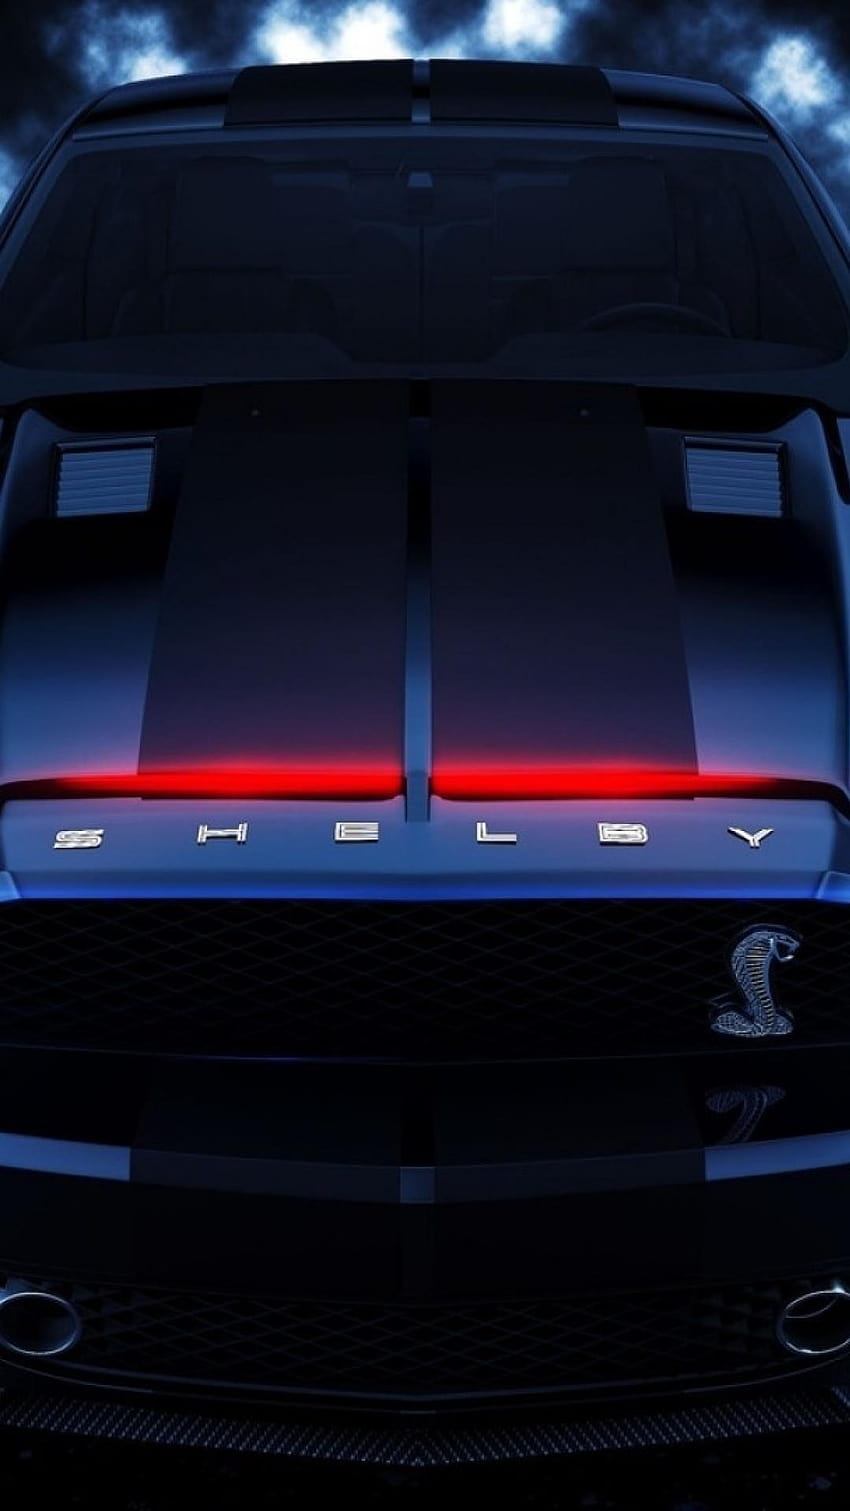 Ford mustang knight rider gt shelby car, knight rider iphone HD phone wallpaper